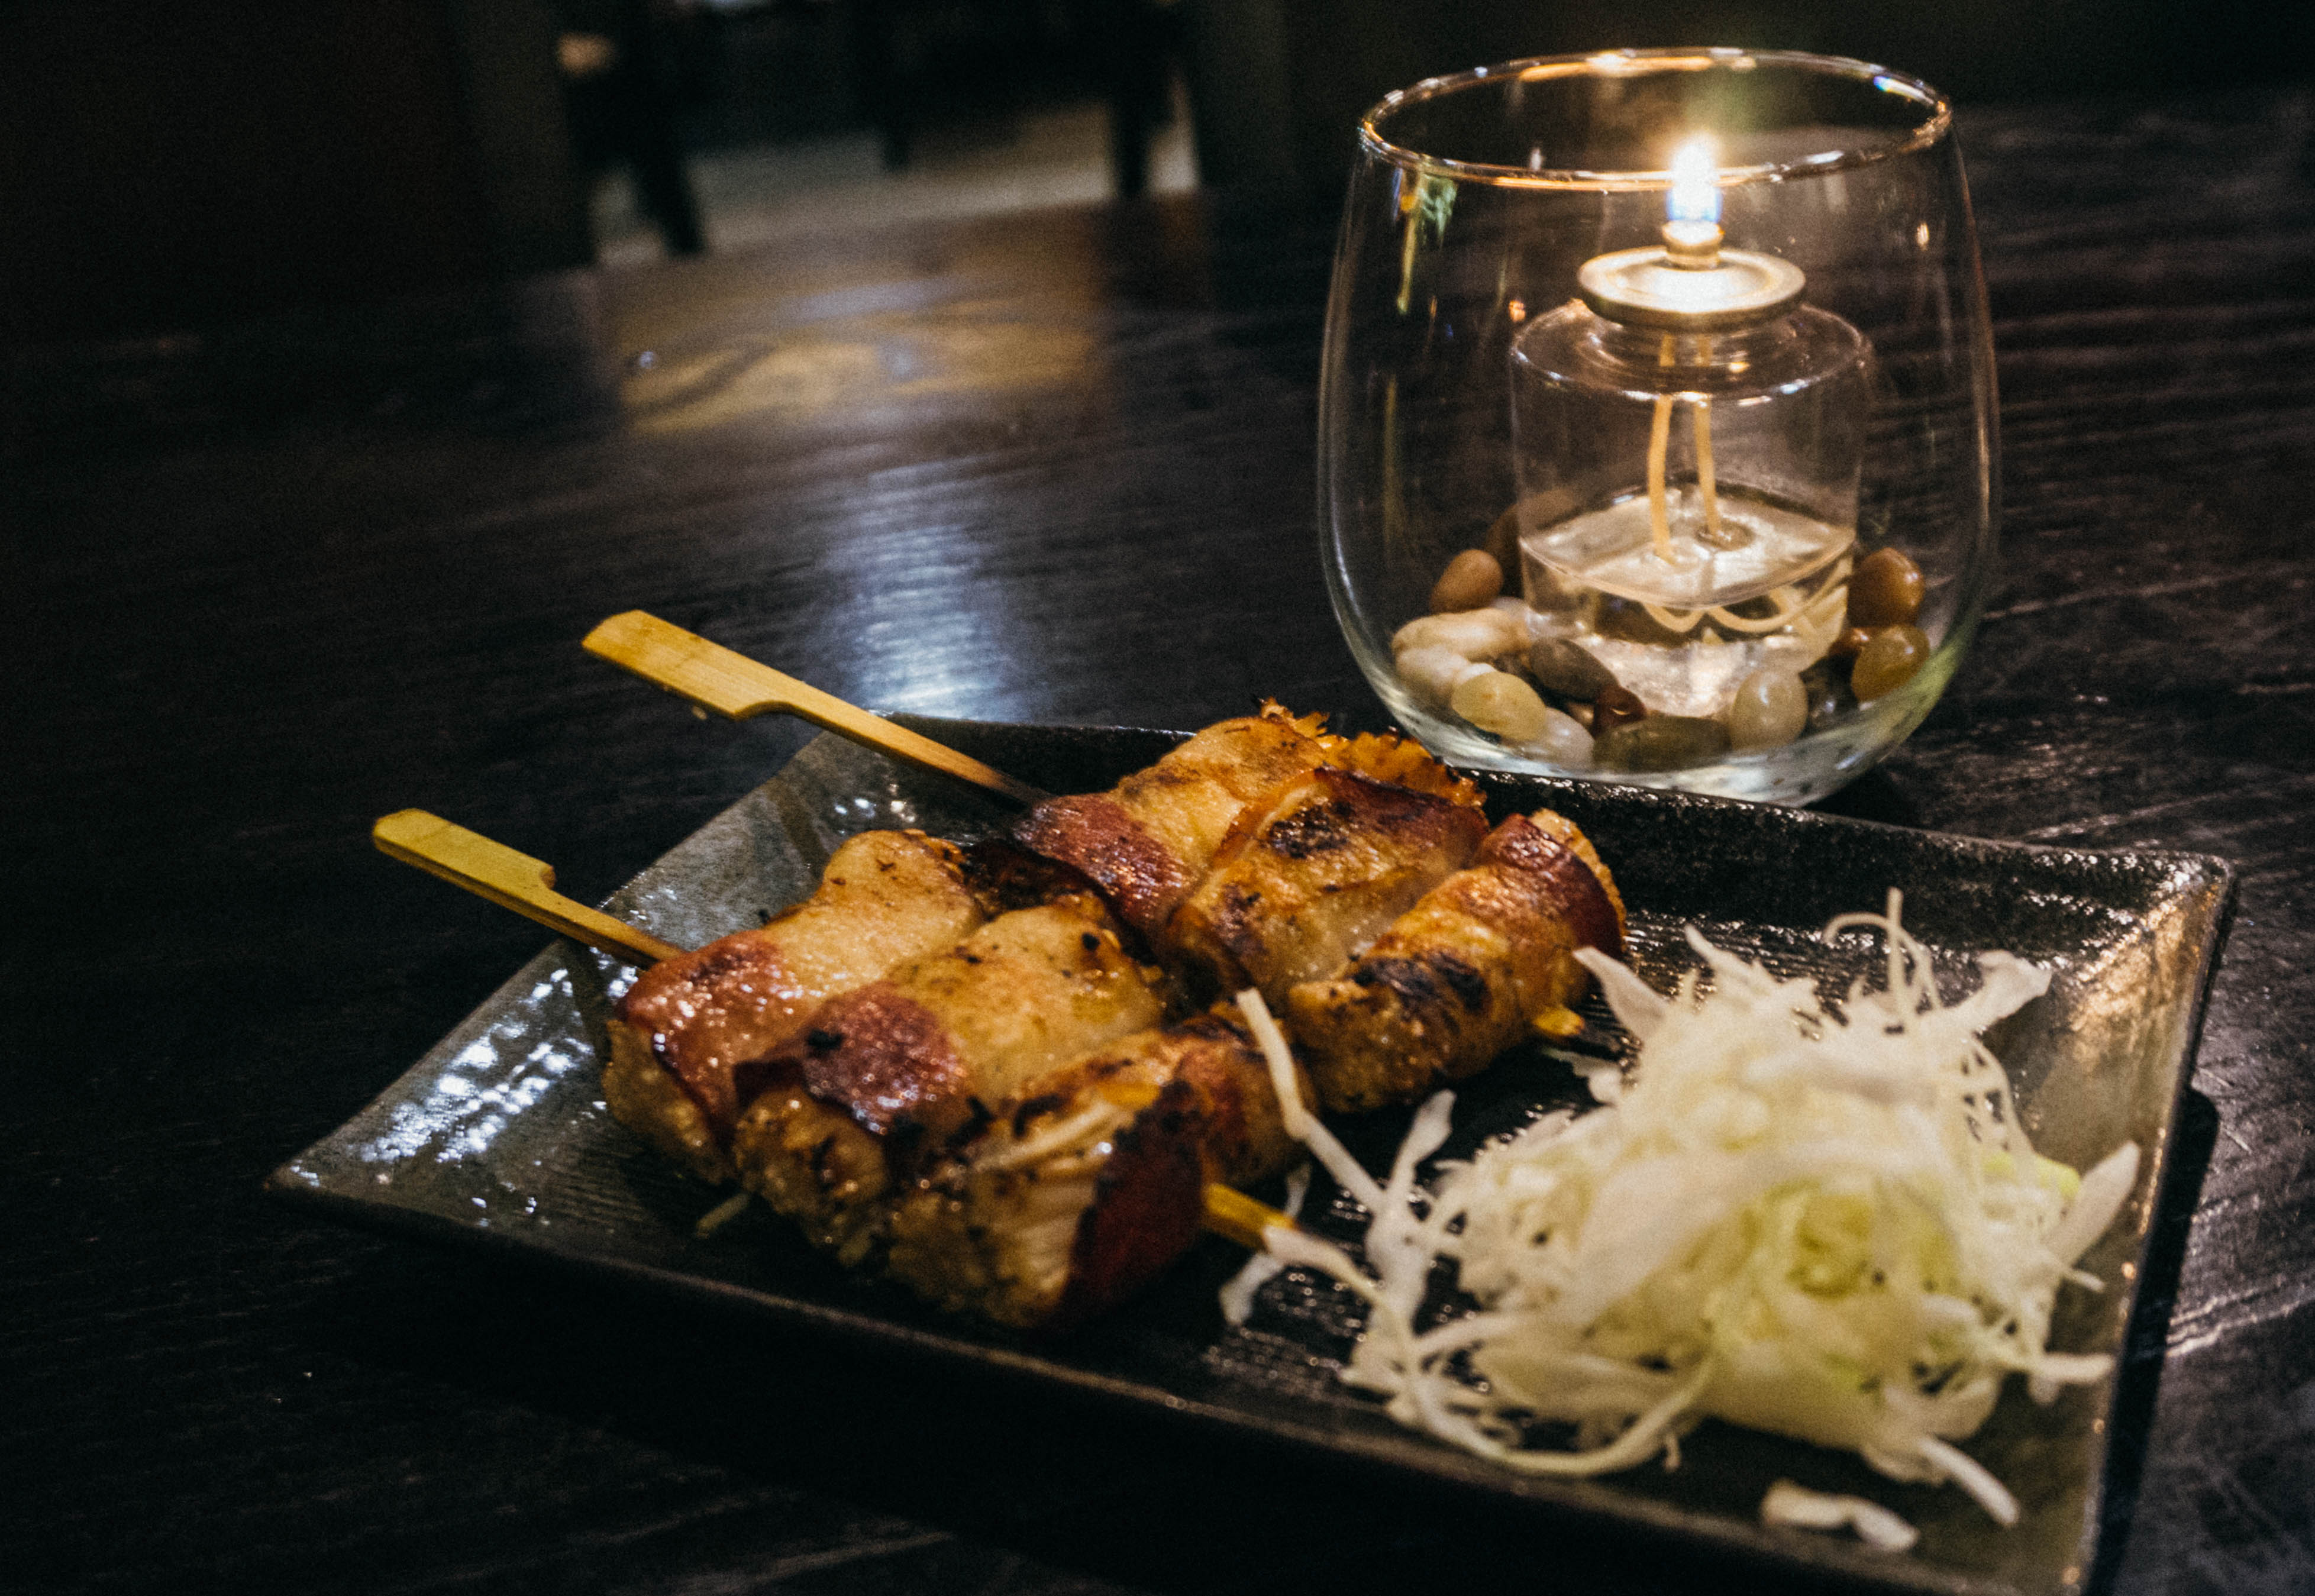 Dragonfly: The Robata Grill